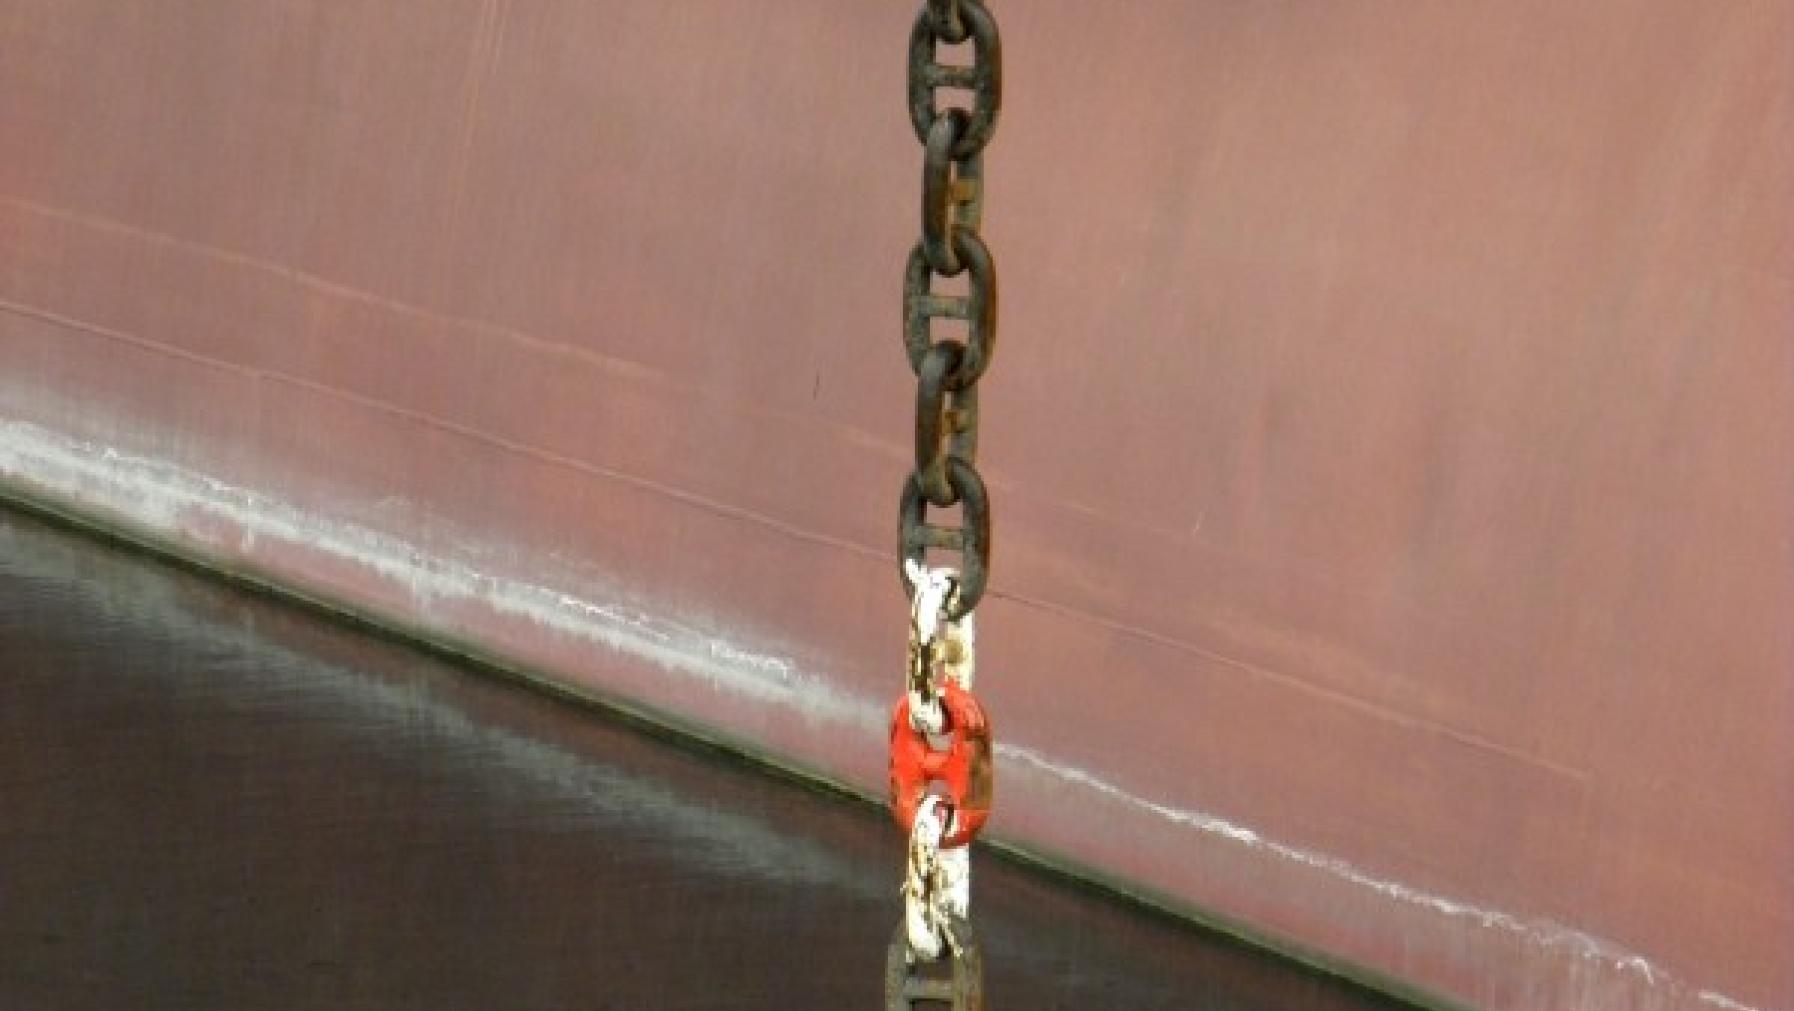 A chain next to a ship.